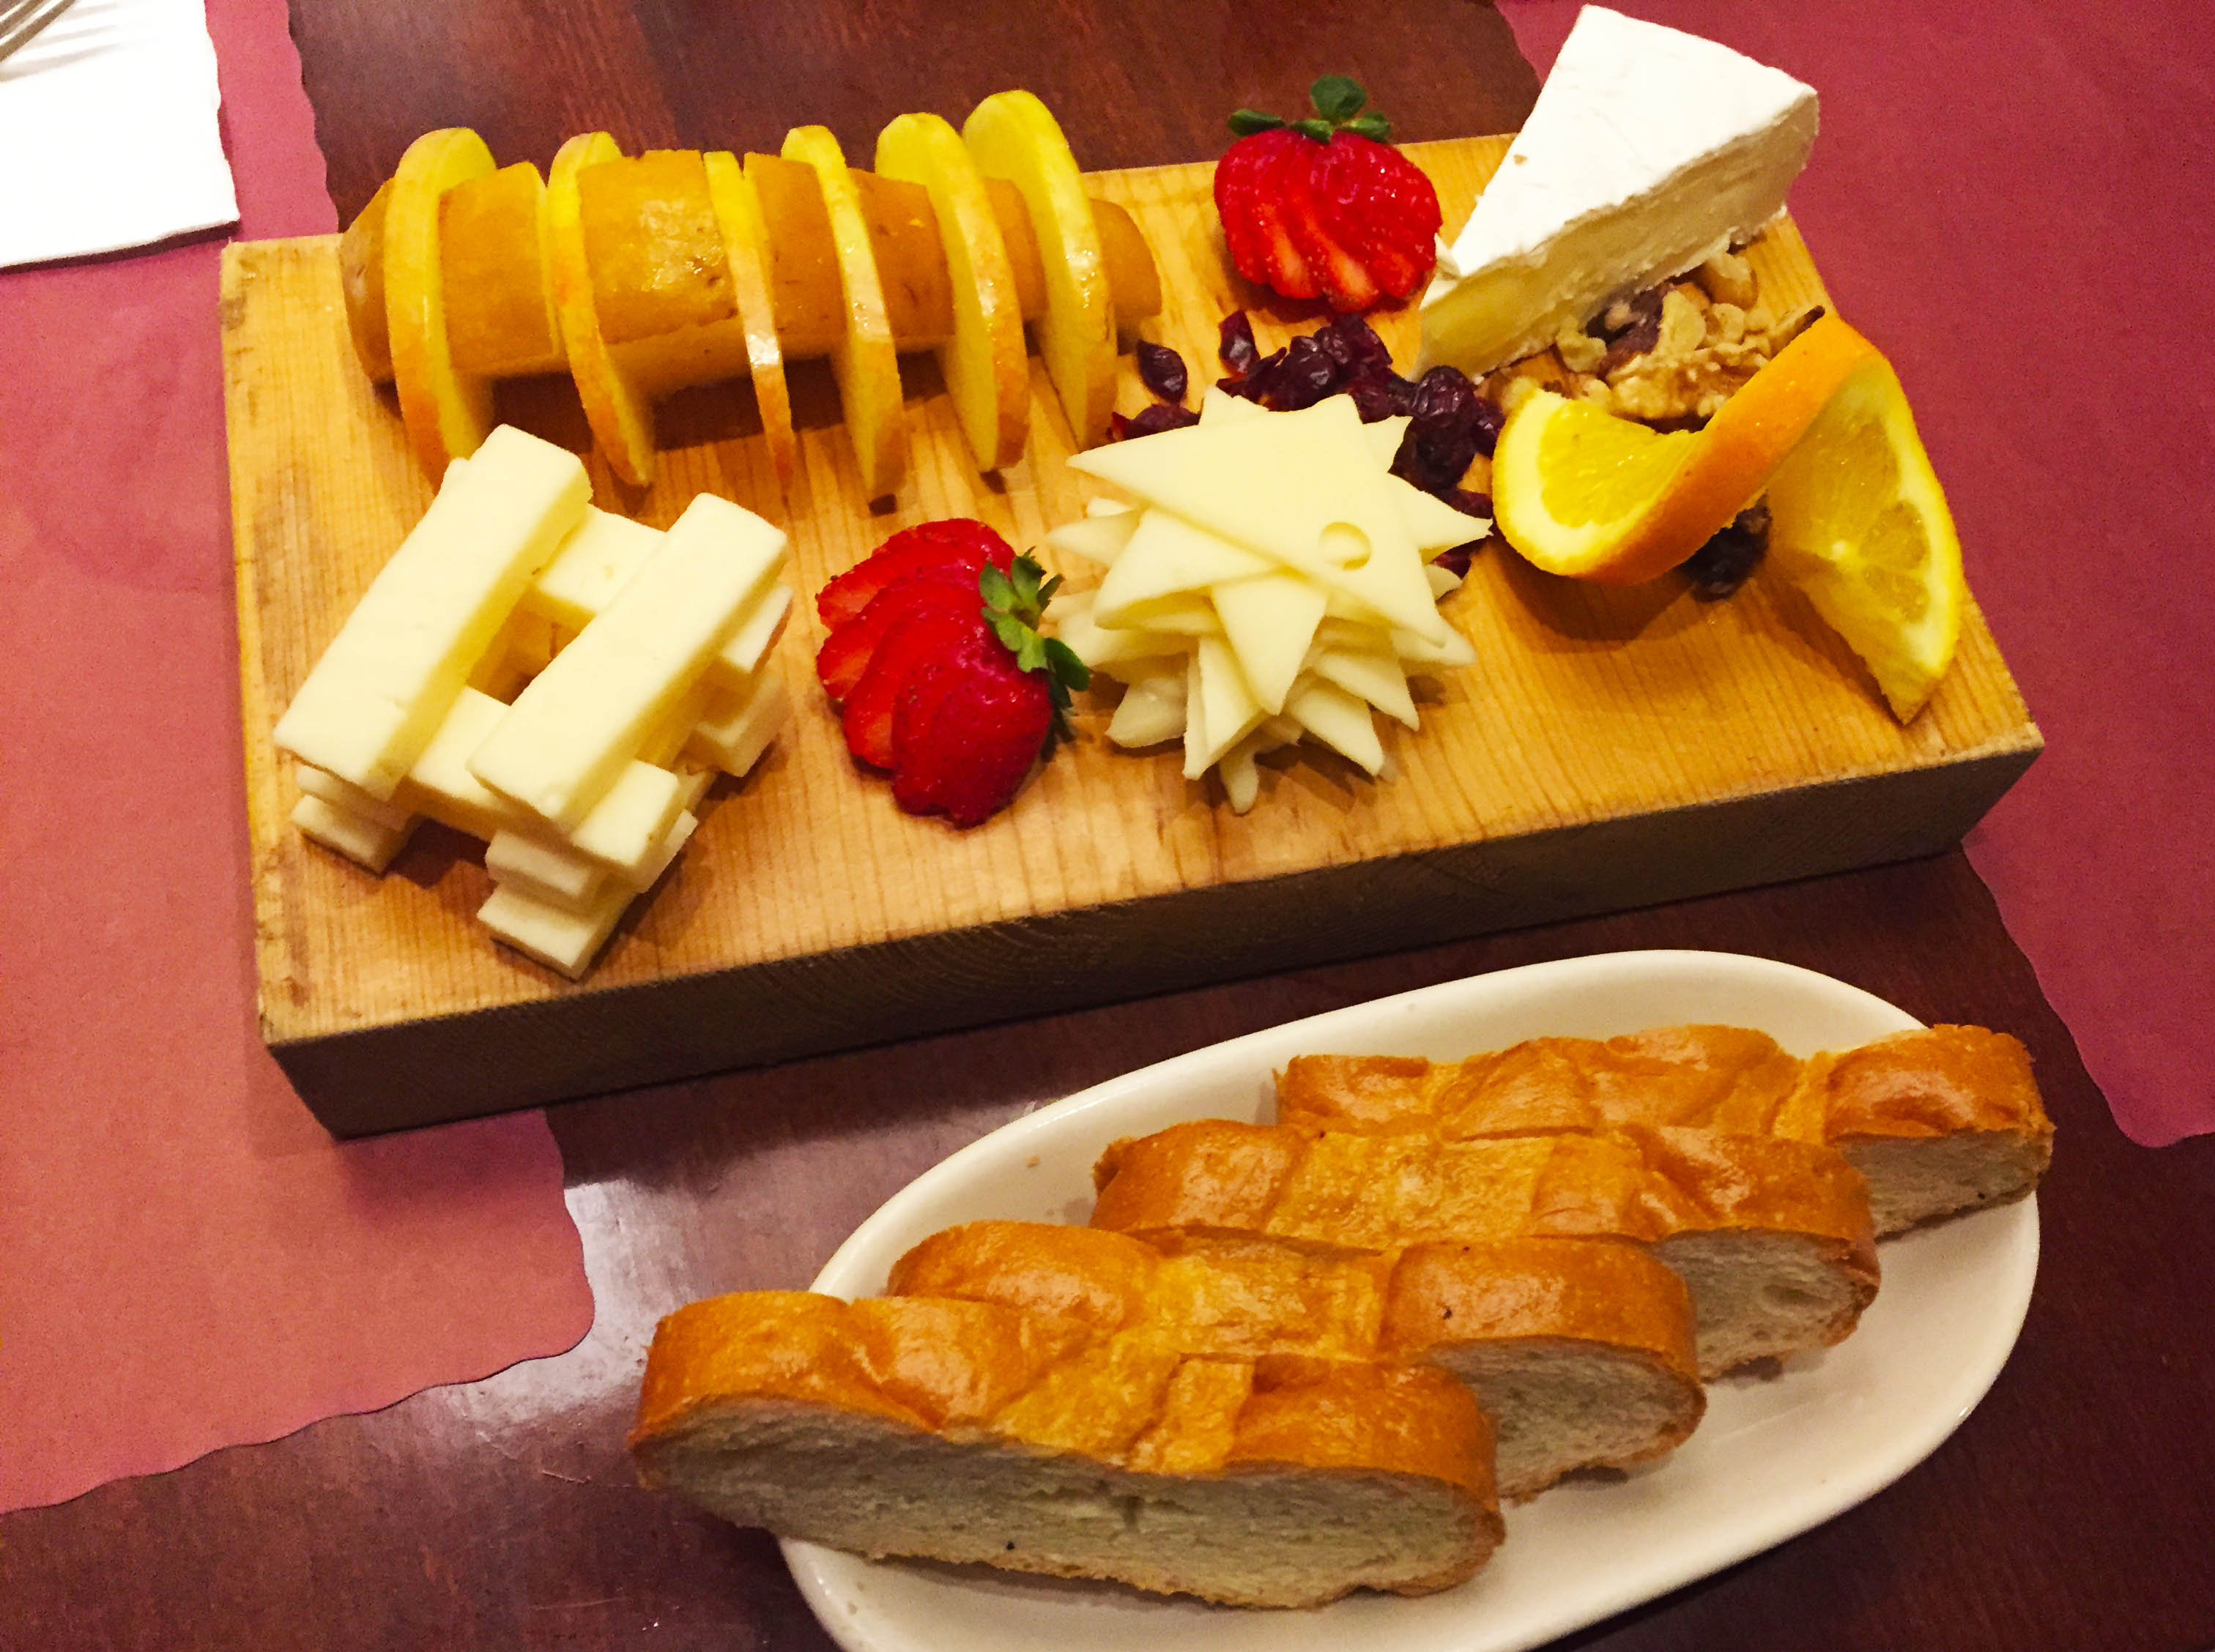 Crepes & Corks cheese plate